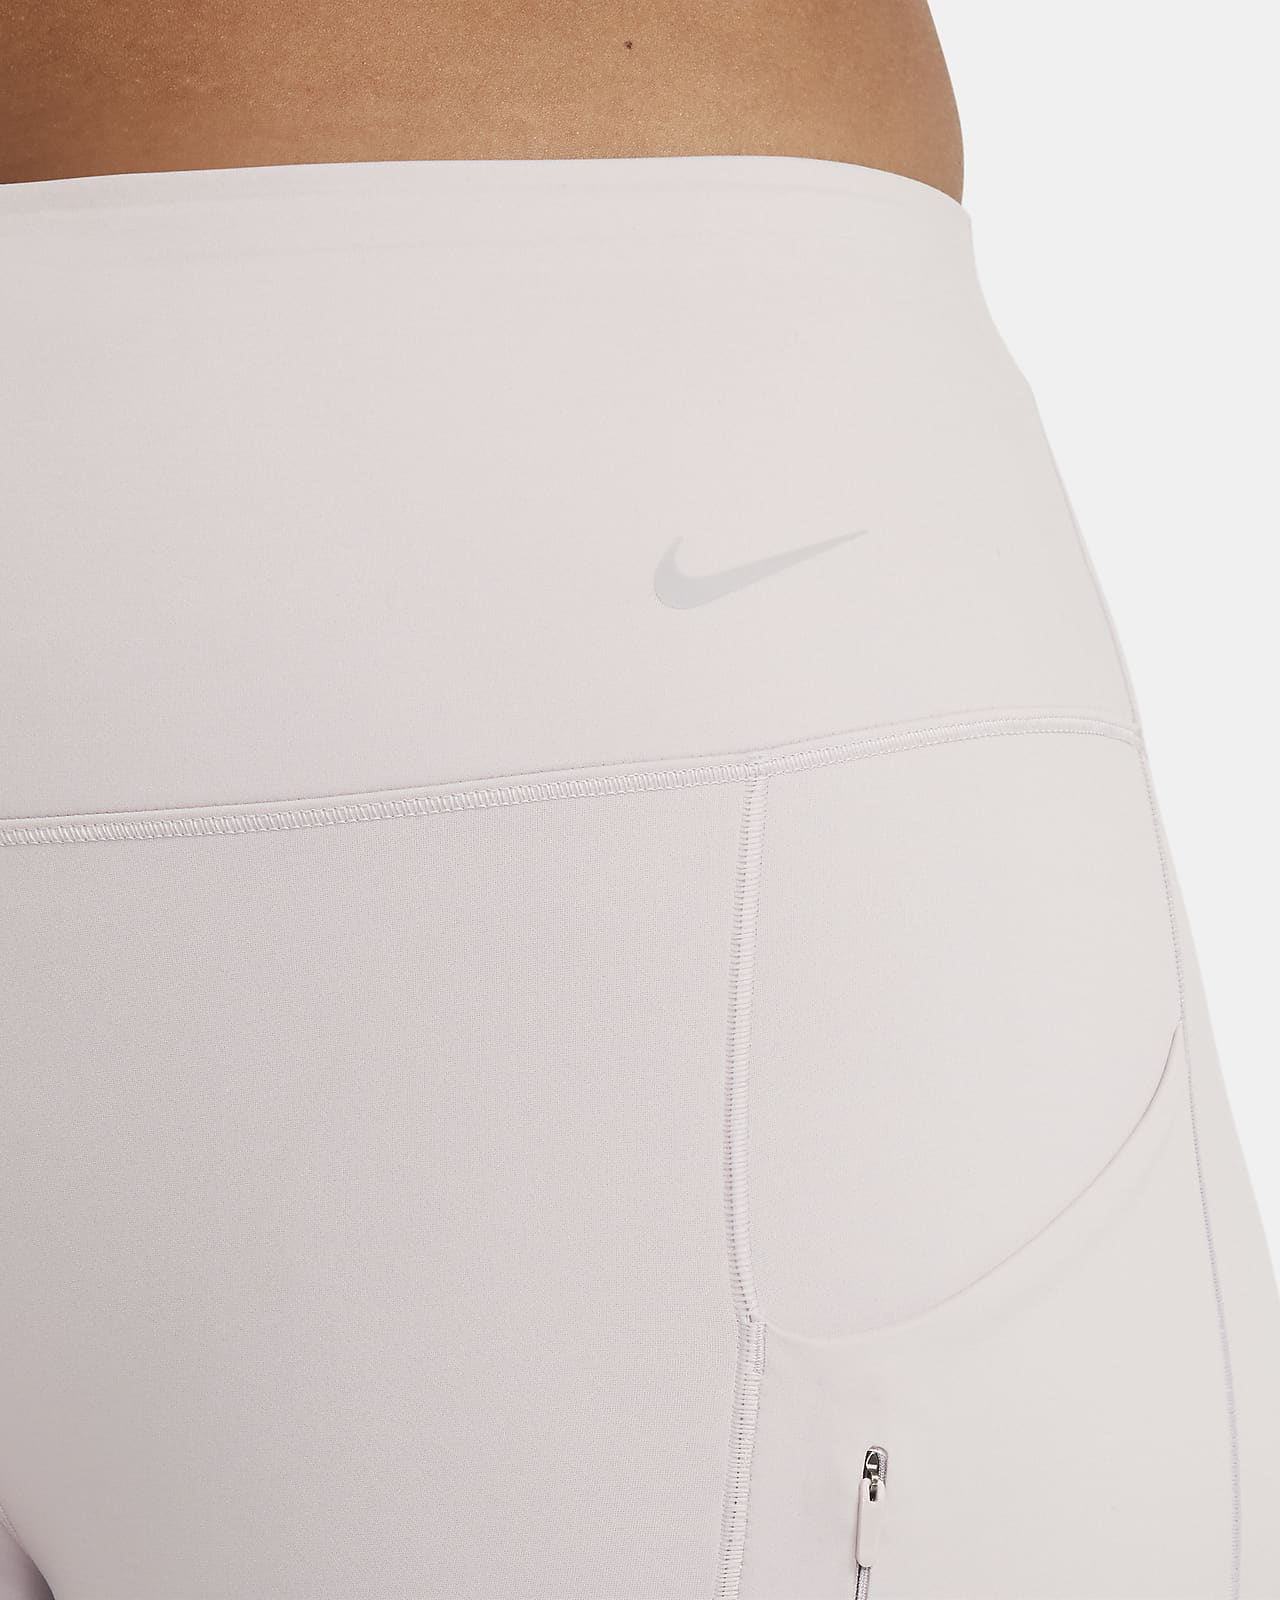 Buy Nike Therma-fit One High-waisted 7/8 Leggings - Grey At 38% Off